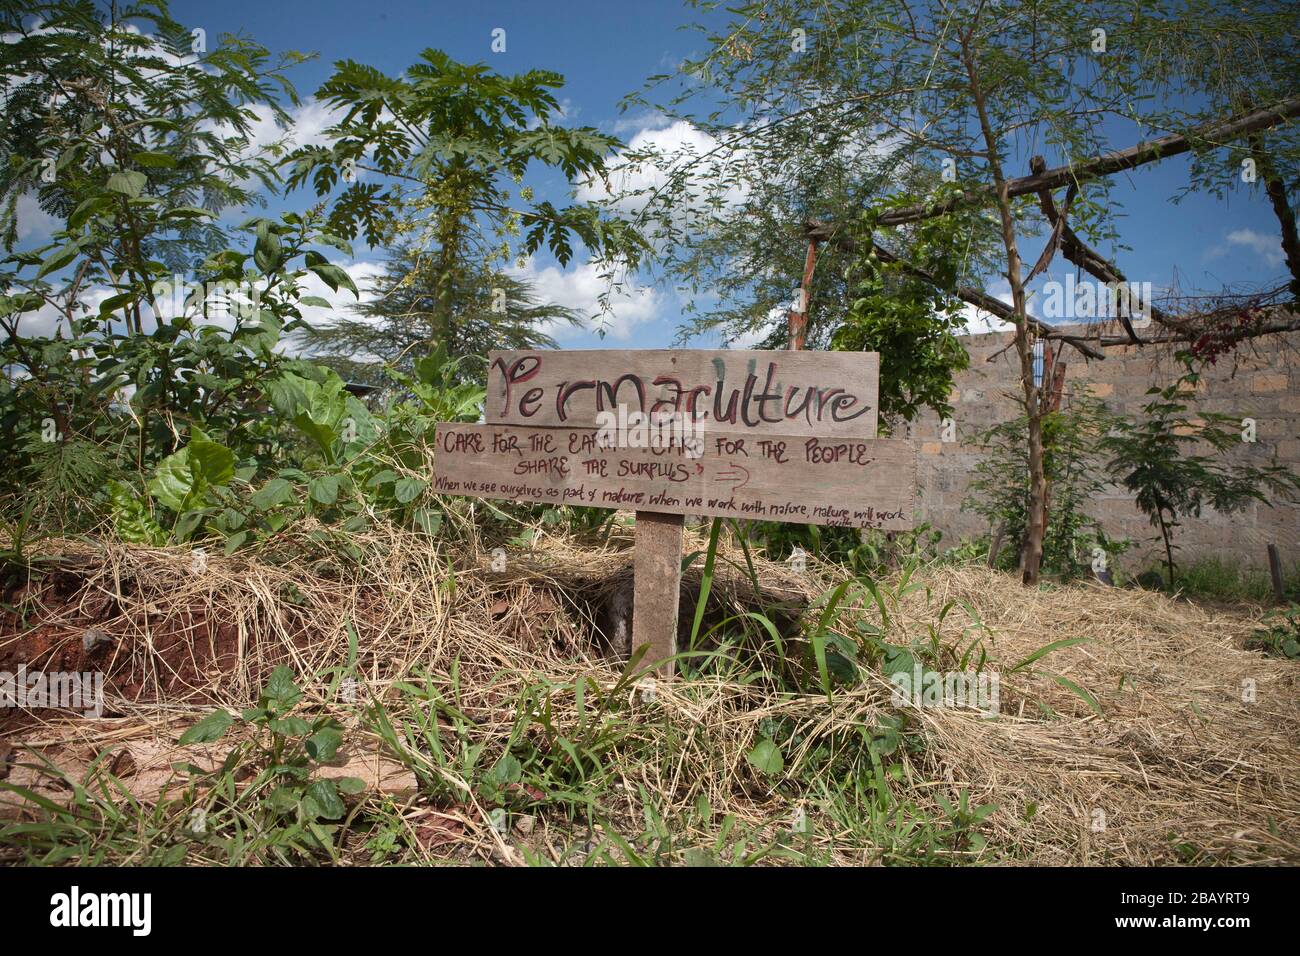 A Permaculture garden in a school for orphaned children on Mombasa road, Nairobi, Kenya. Stock Photo